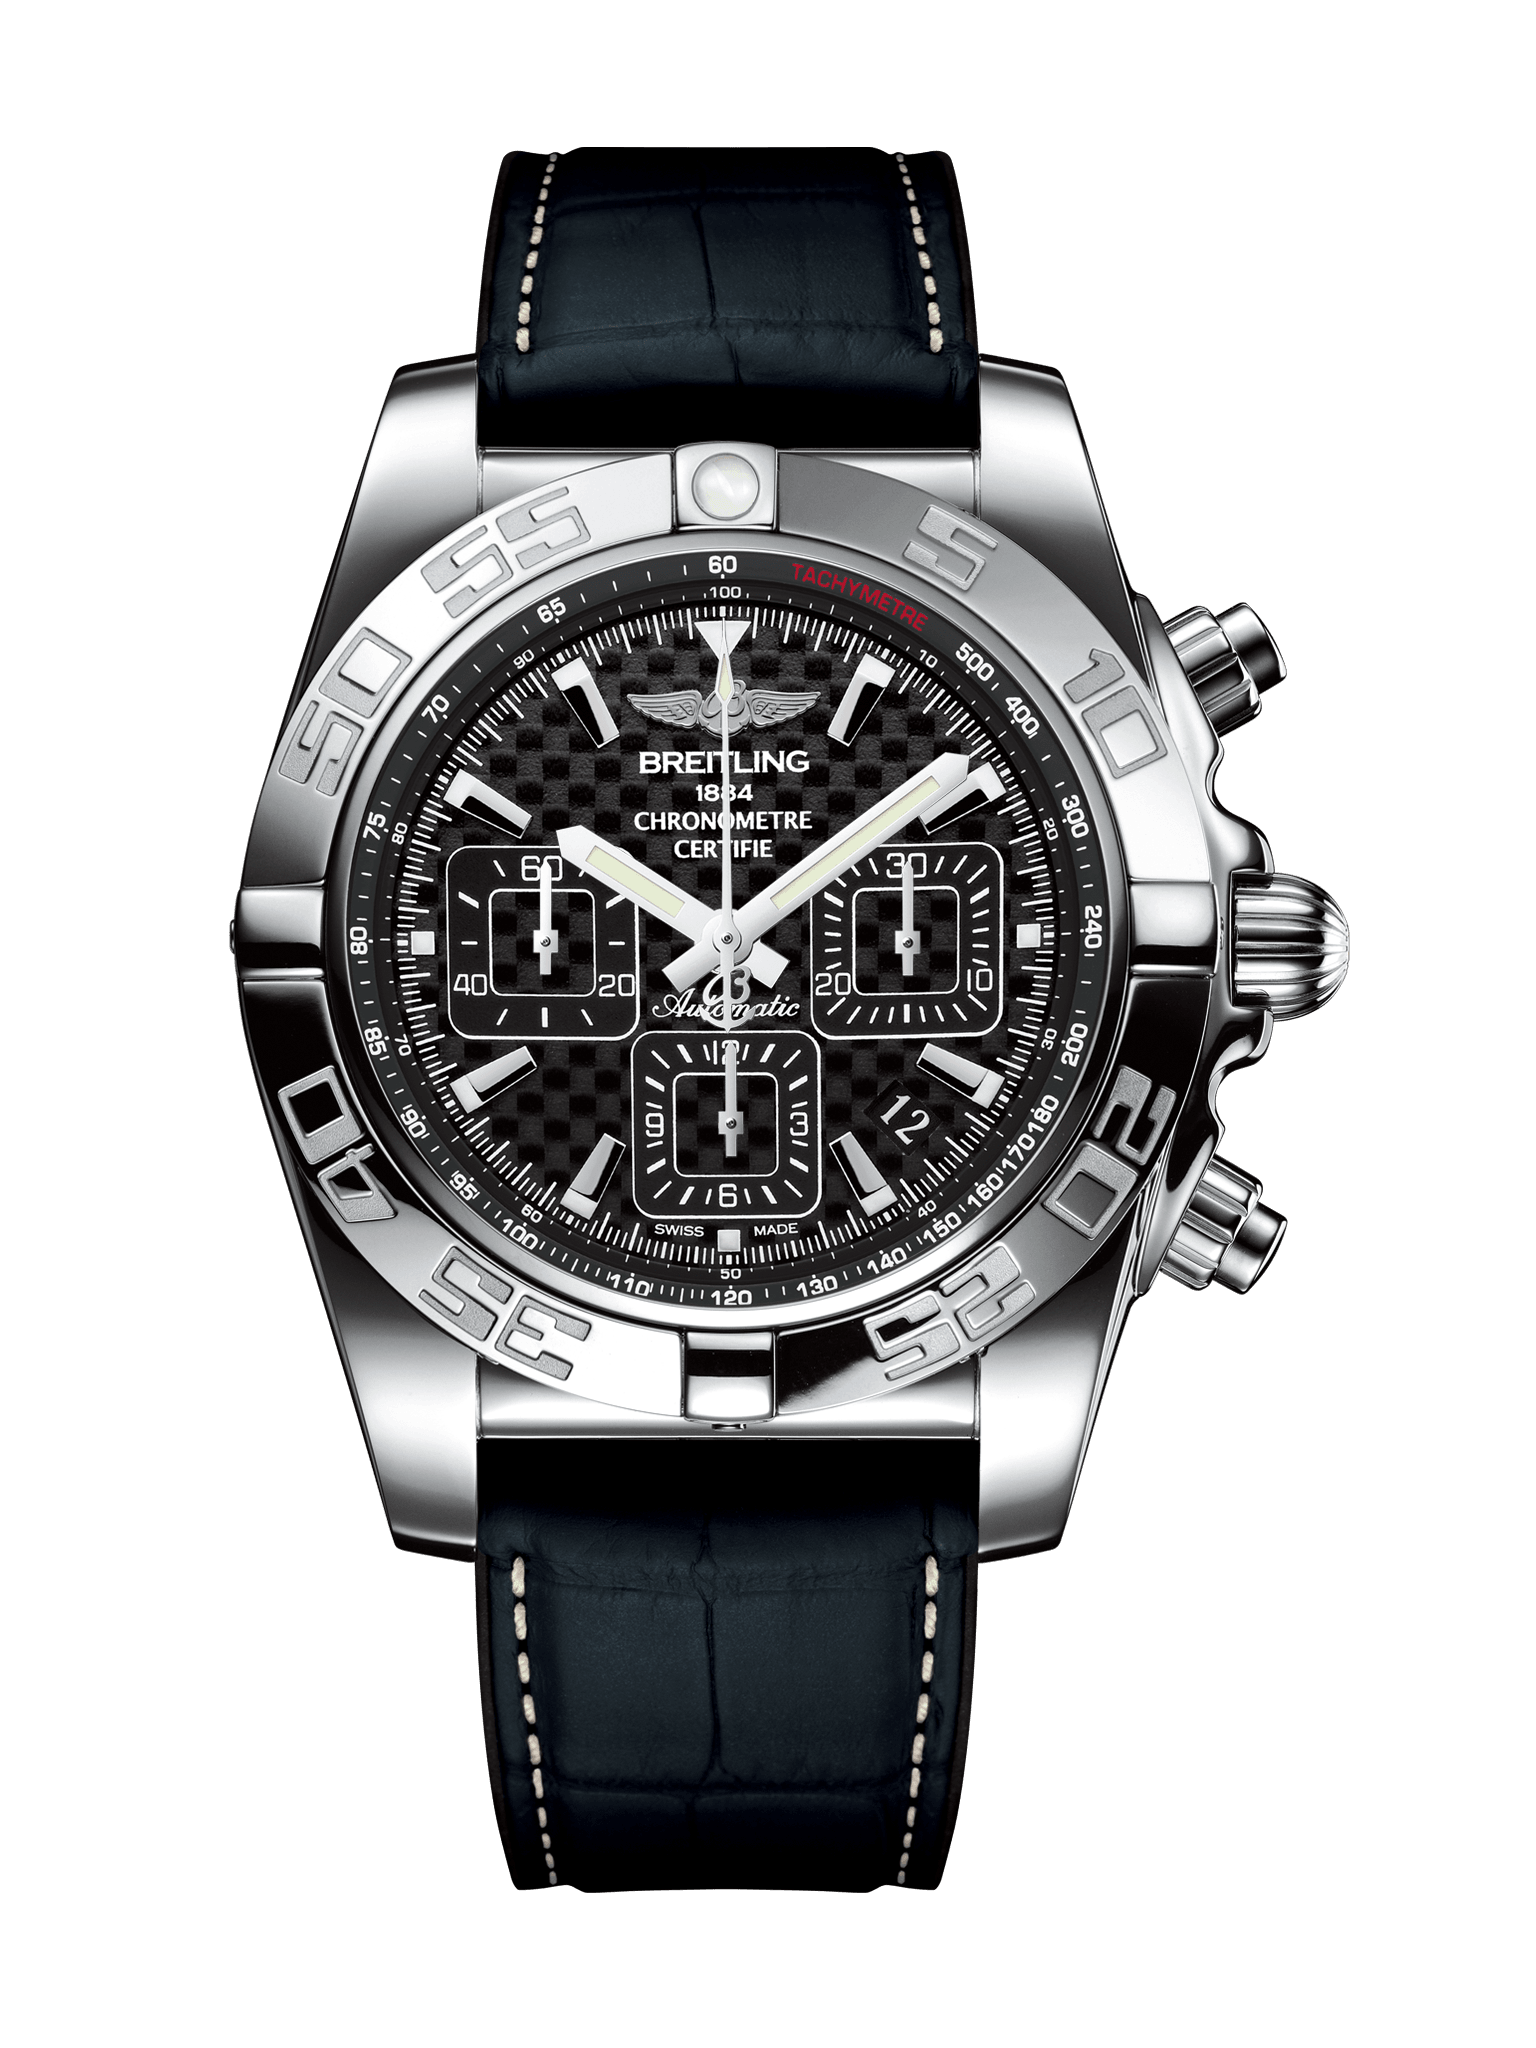 Breitling Super Ocean A13320 stainless steel 46 mm watchbreitling Super Ocean Automatic Super Ocean Auto 44 44